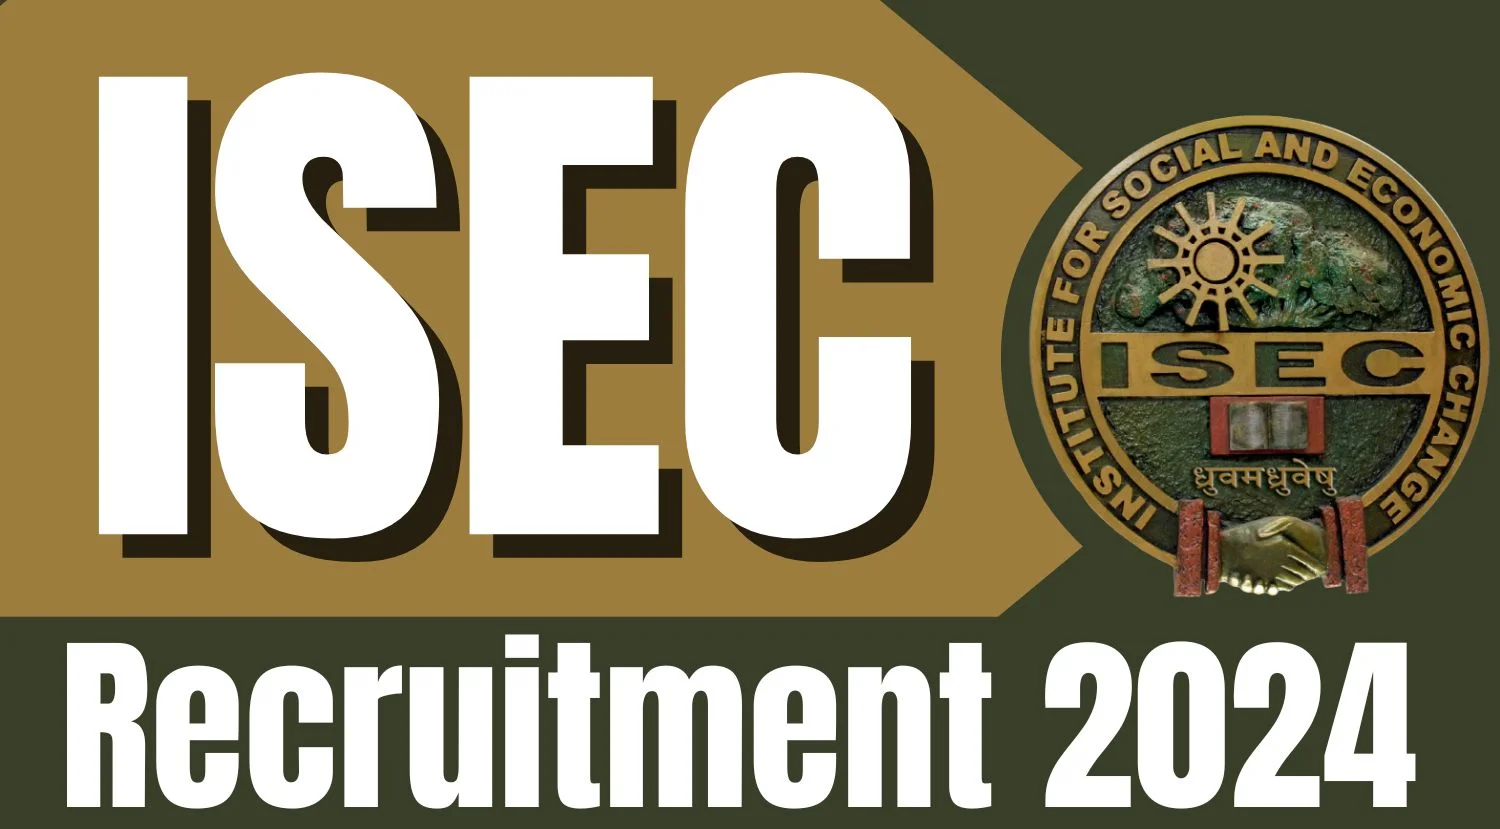 ISEC Recruitment 2024 Notification Out